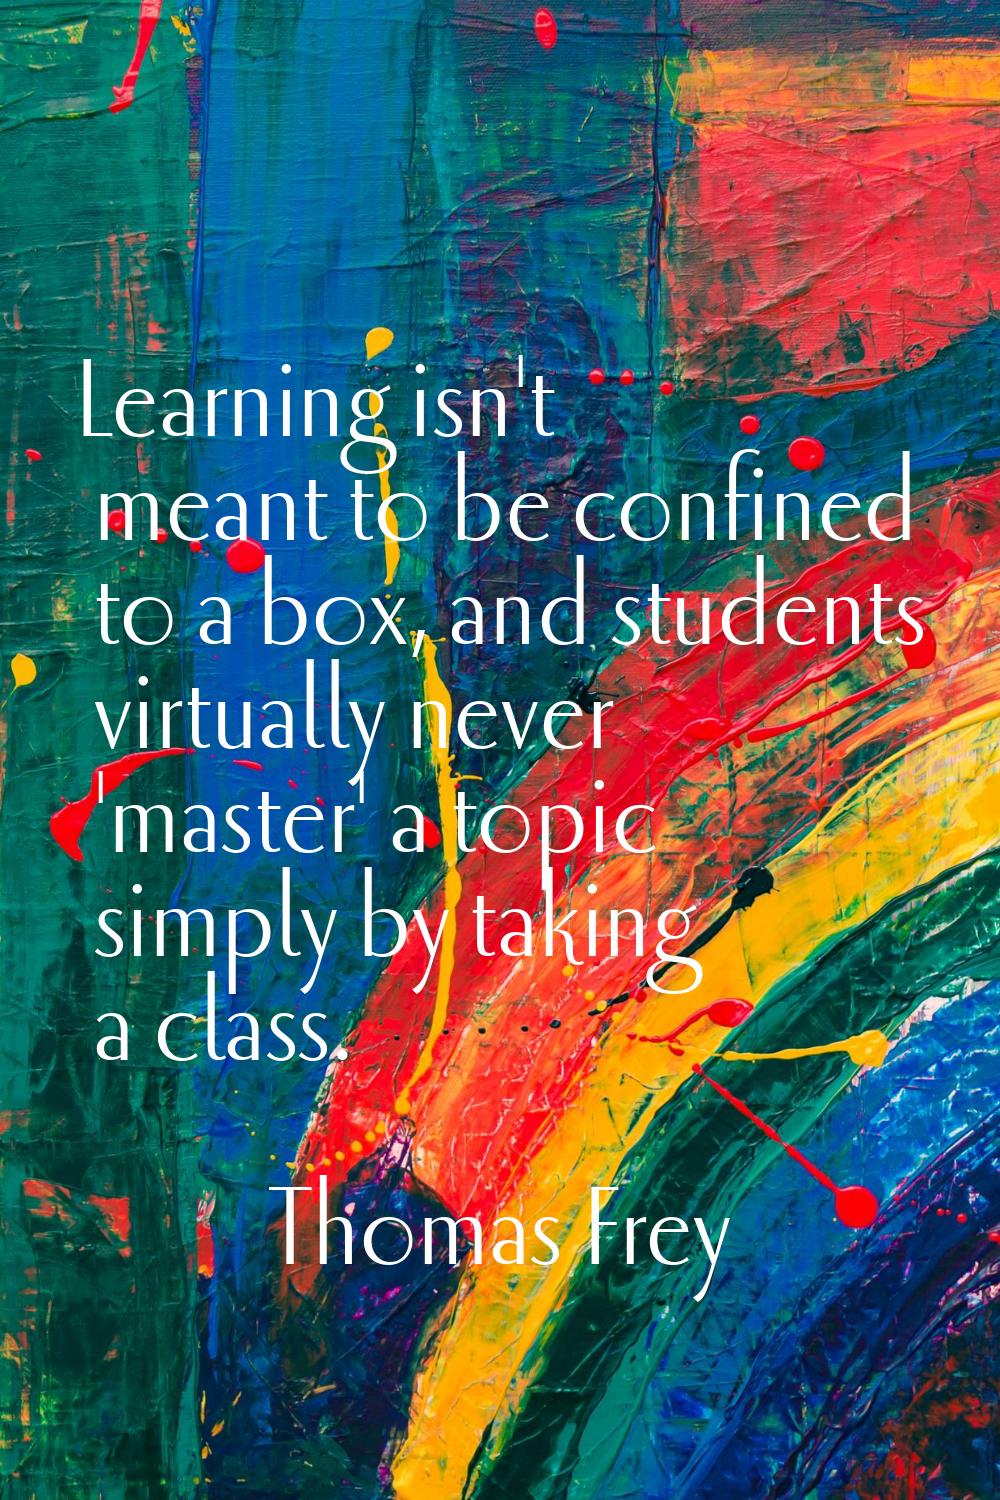 Learning isn't meant to be confined to a box, and students virtually never 'master' a topic simply 